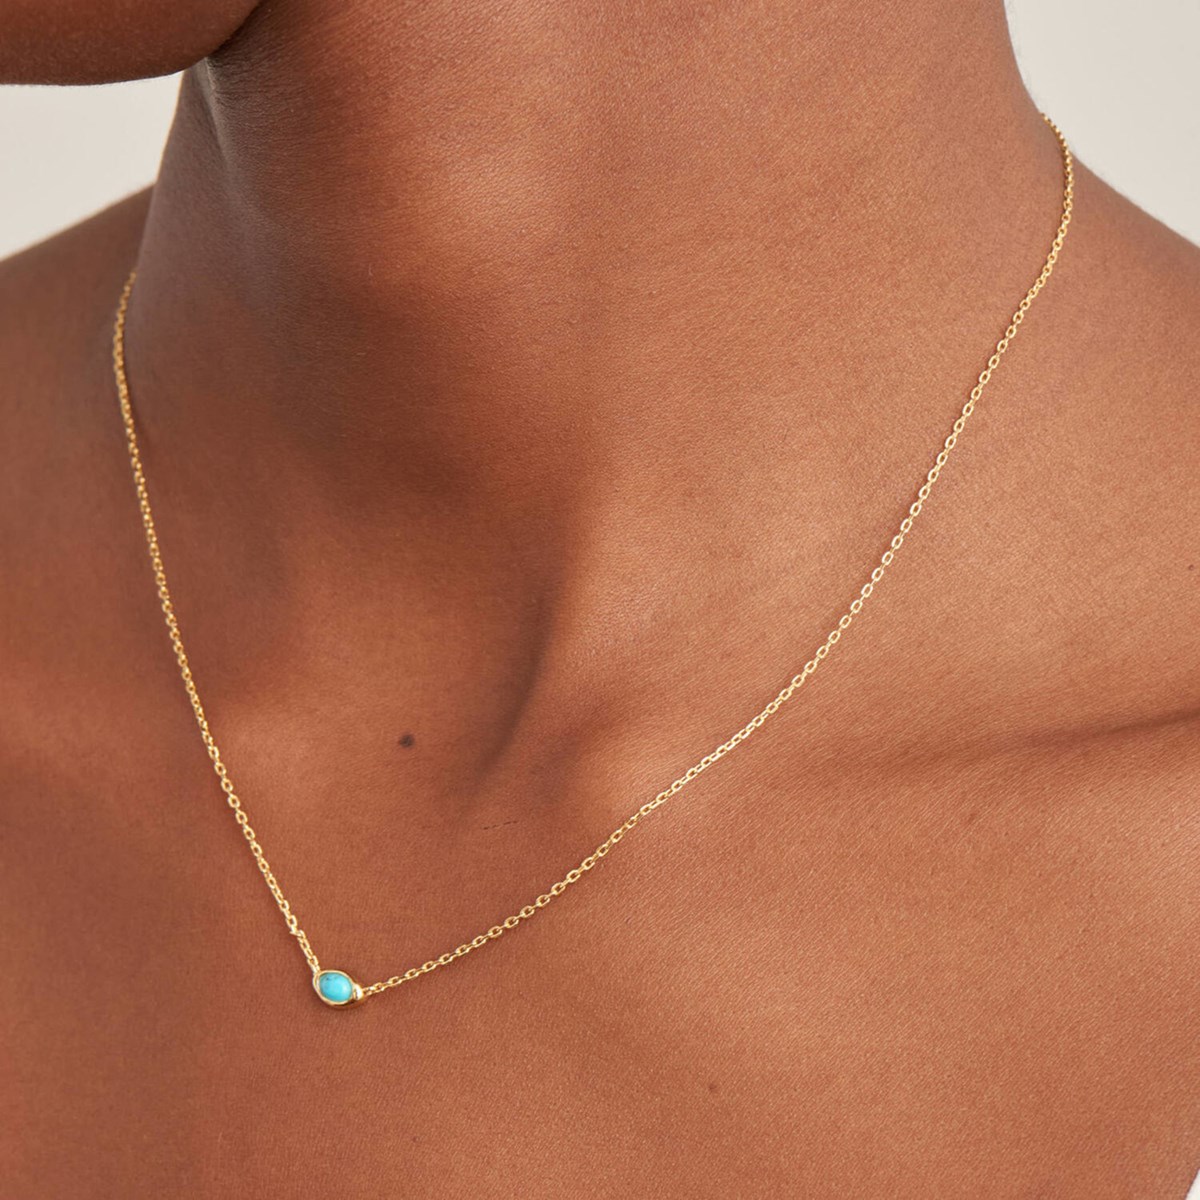 Collier Ania Haie Making Waves doré turquoise - vue 2